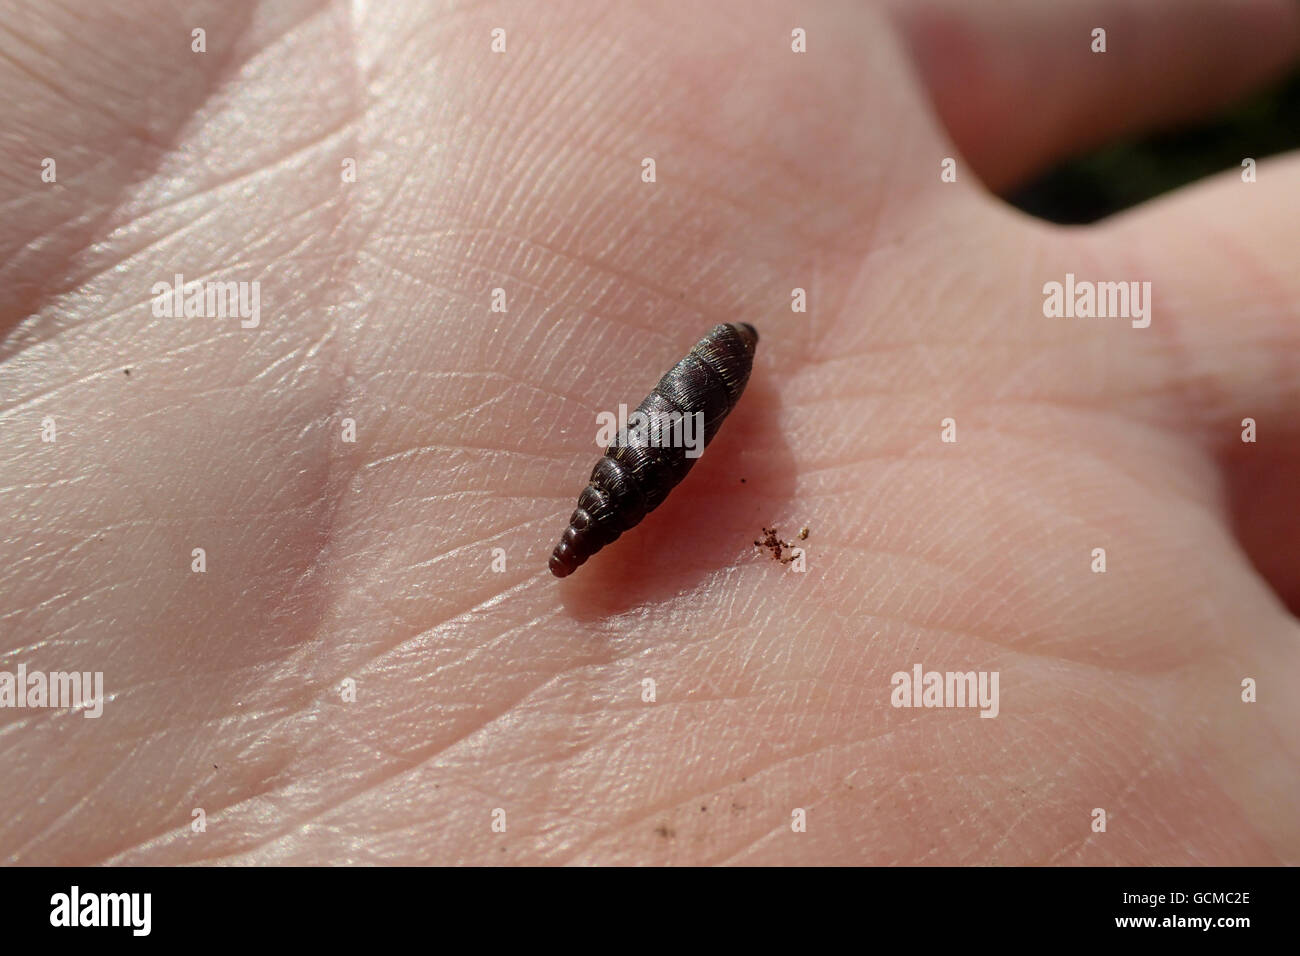 Dorsal view of plaited door snail (Marpessa (= Cochlodina) laminata) on the palm of the photographer's hand Stock Photo